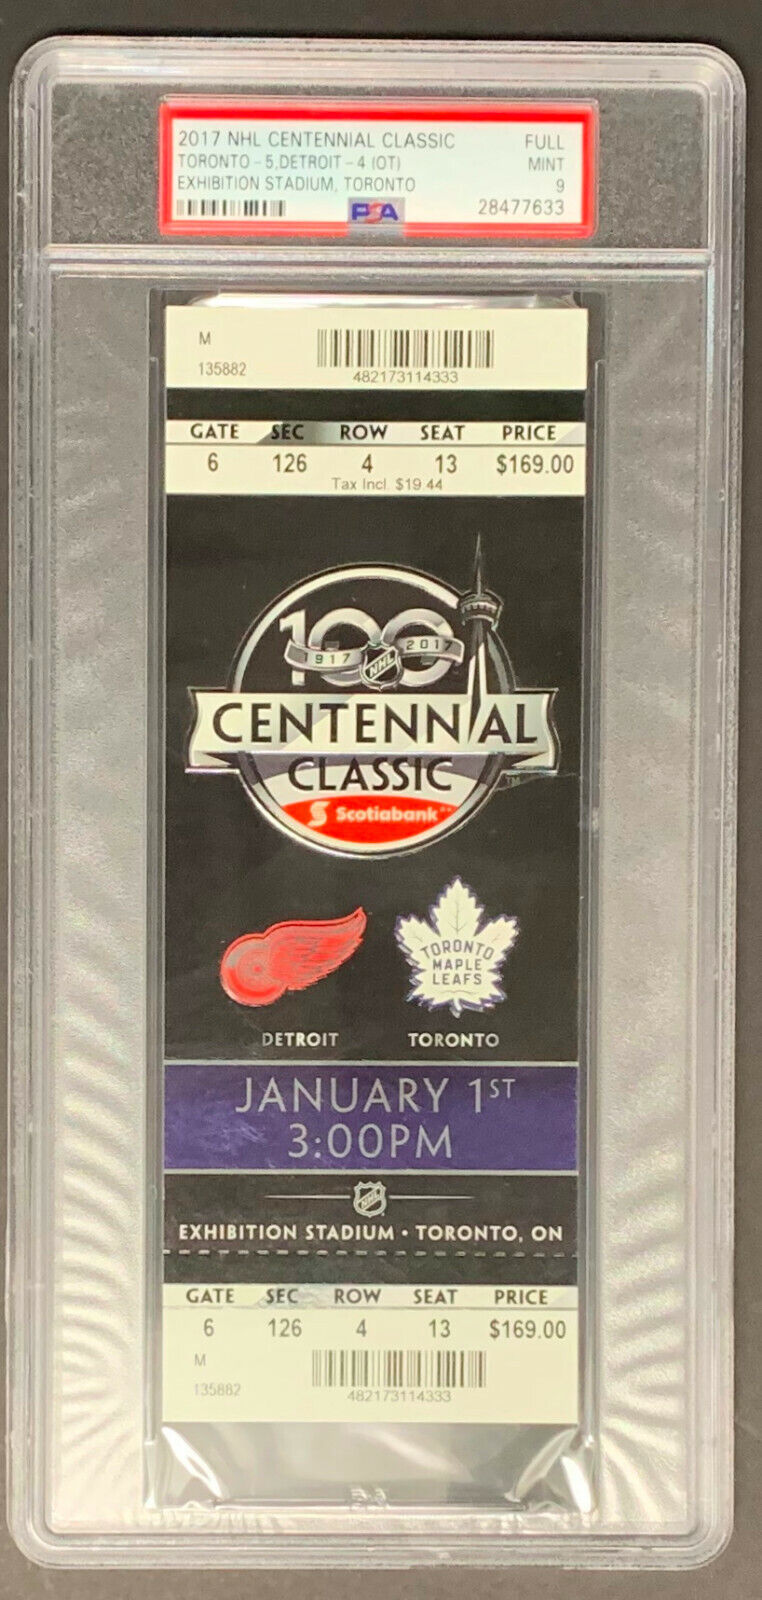 2017 NHL Centennial Classic Full Ticket Toronto Maple Leafs vs Red Wings PSA 9